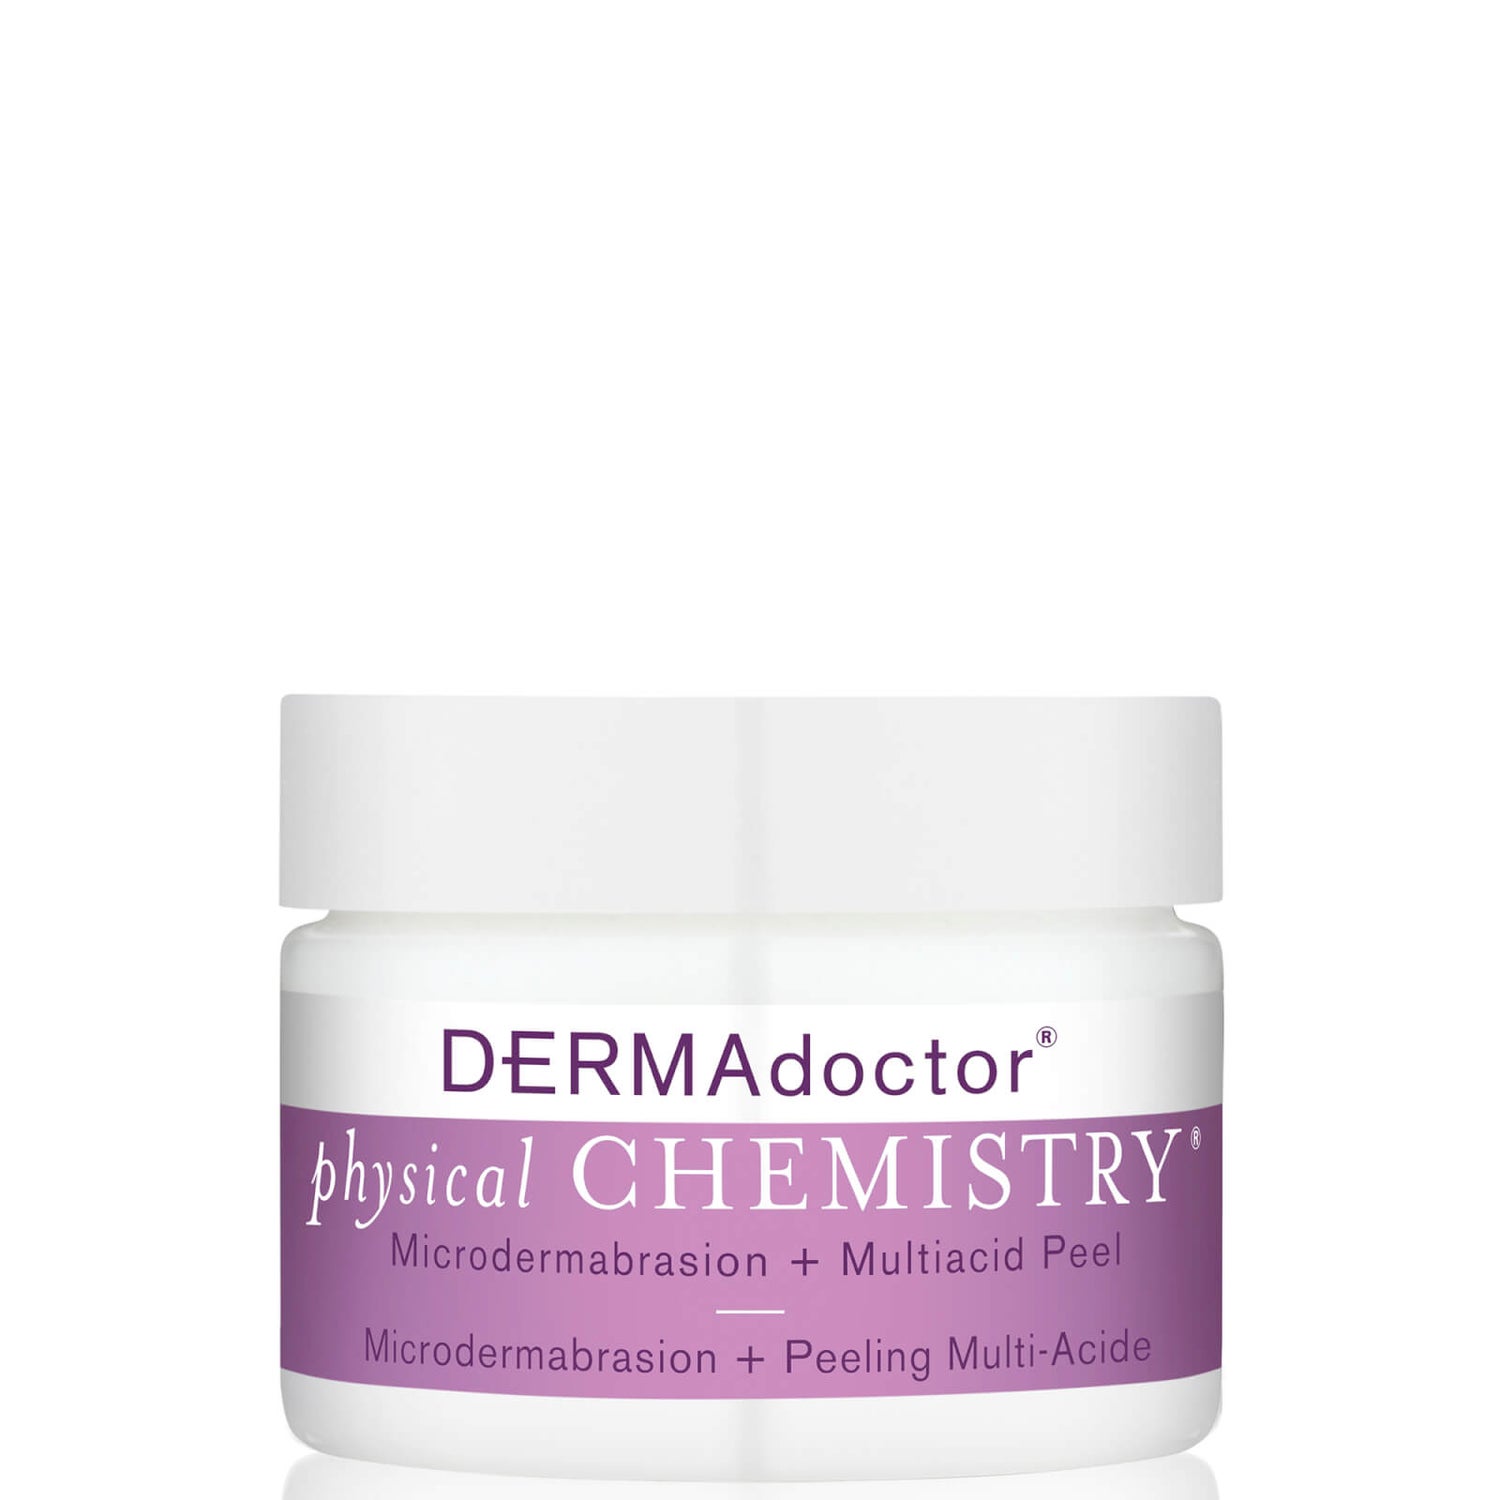 DERMAdoctor Physical Chemistry Facial Microdermabrasion and Multiacid Chemical Peel